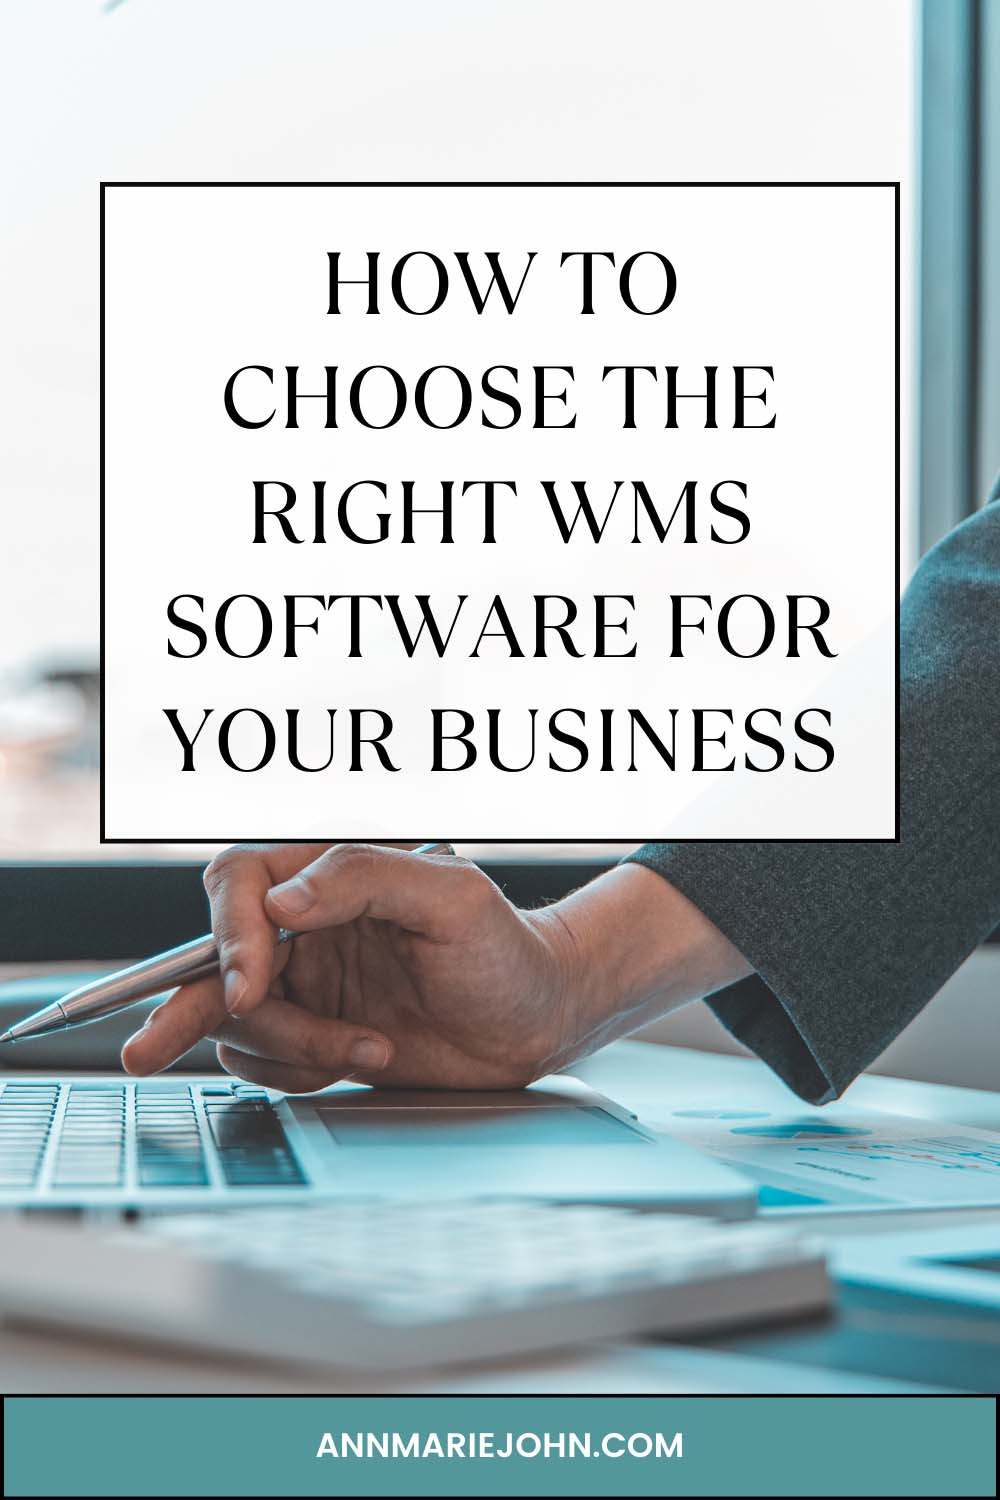 How to Choose the Right WMS Software for Your Business